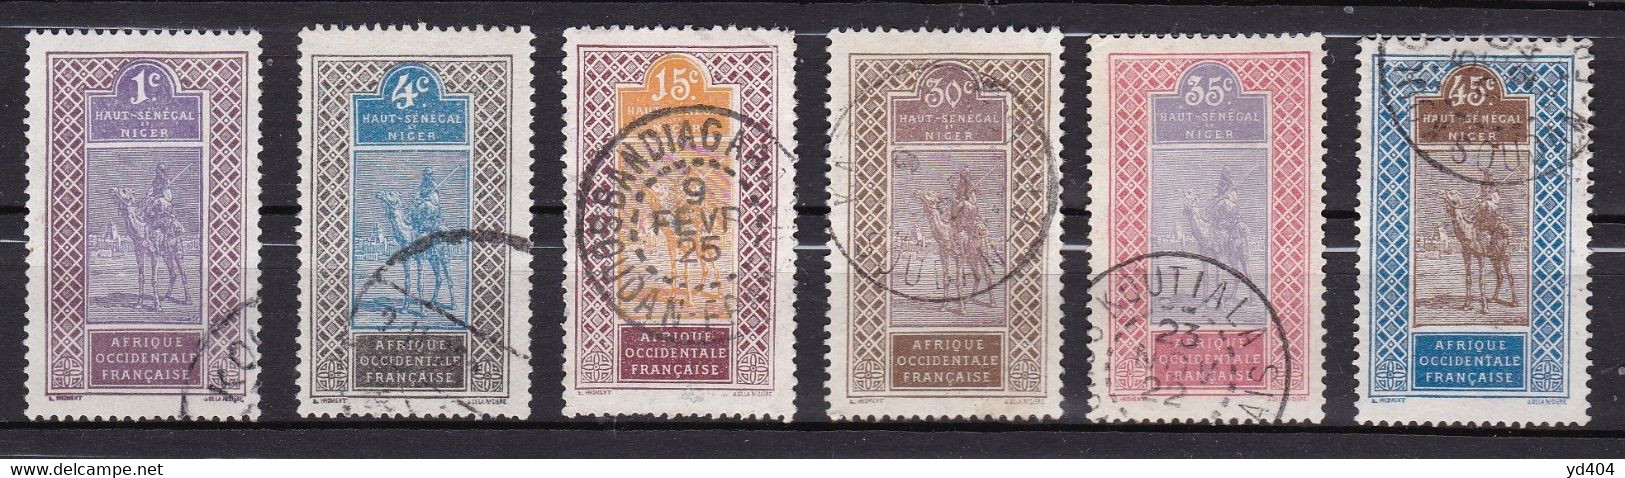 CF-HS-02 – FRENCH COLONIES – Upper Senegal & Niger – 1914/17 – SG # 5970 USED 35 € - Used Stamps